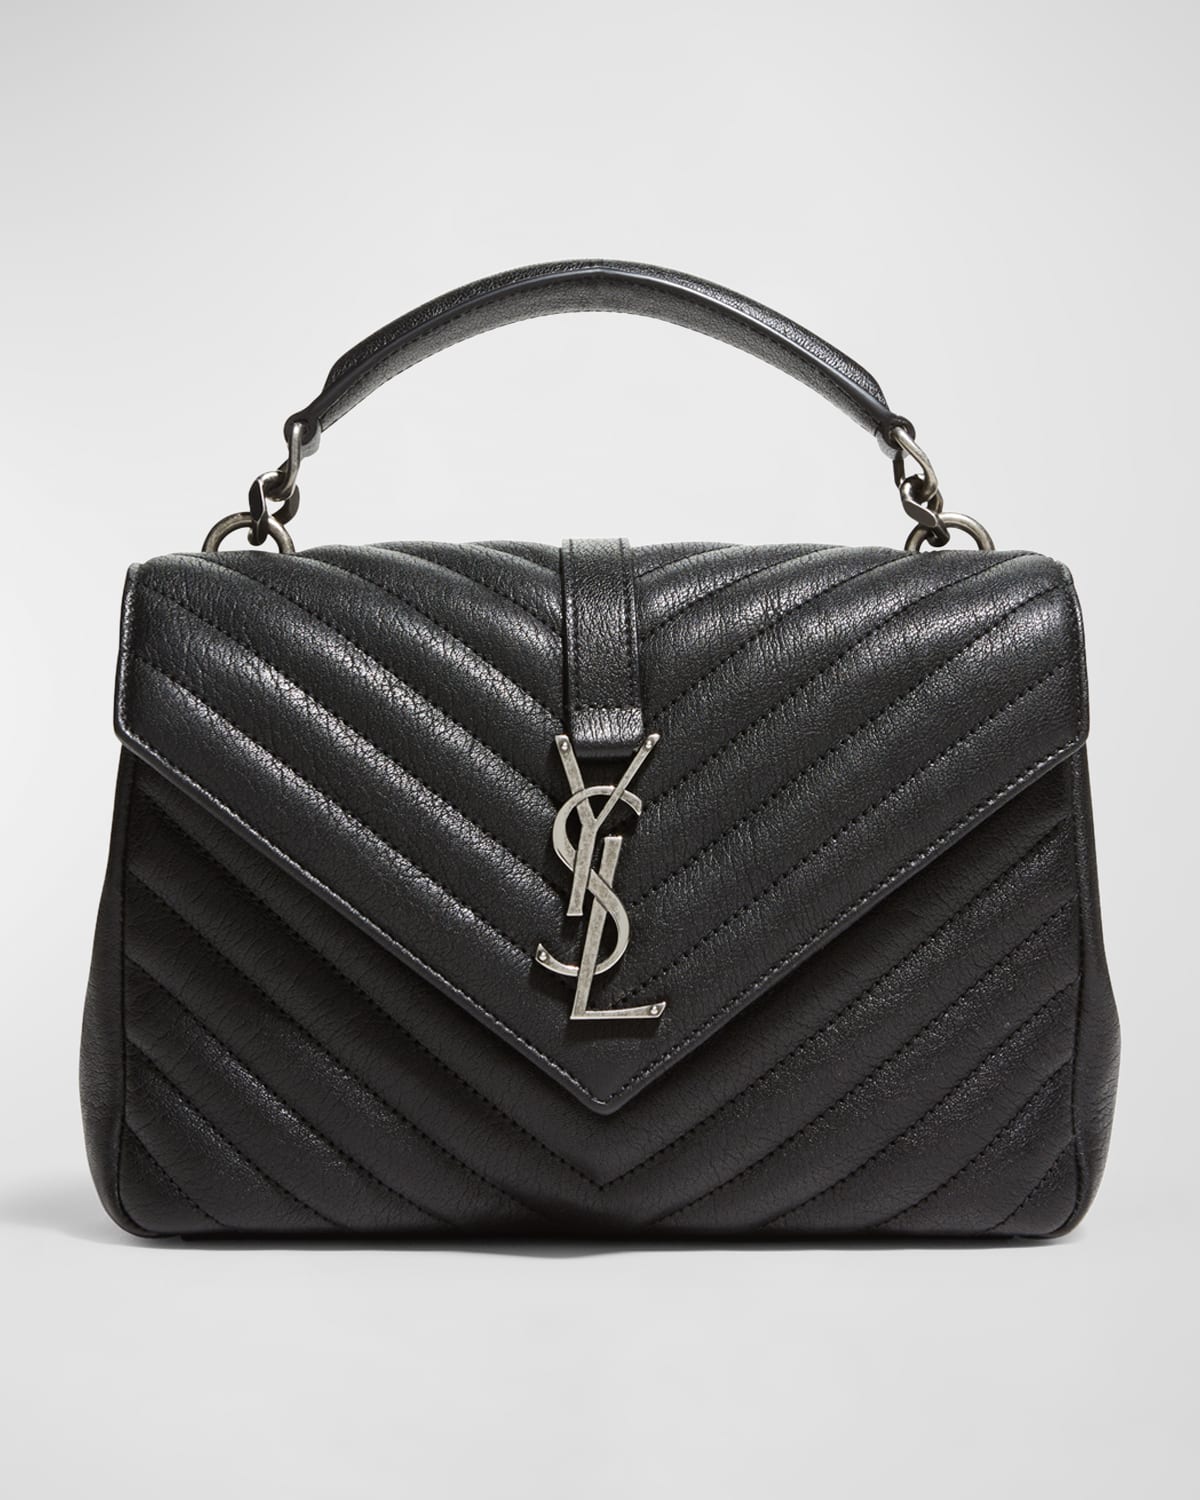 College Medium Flap YSL Shoulder Bag in Quilted Leather